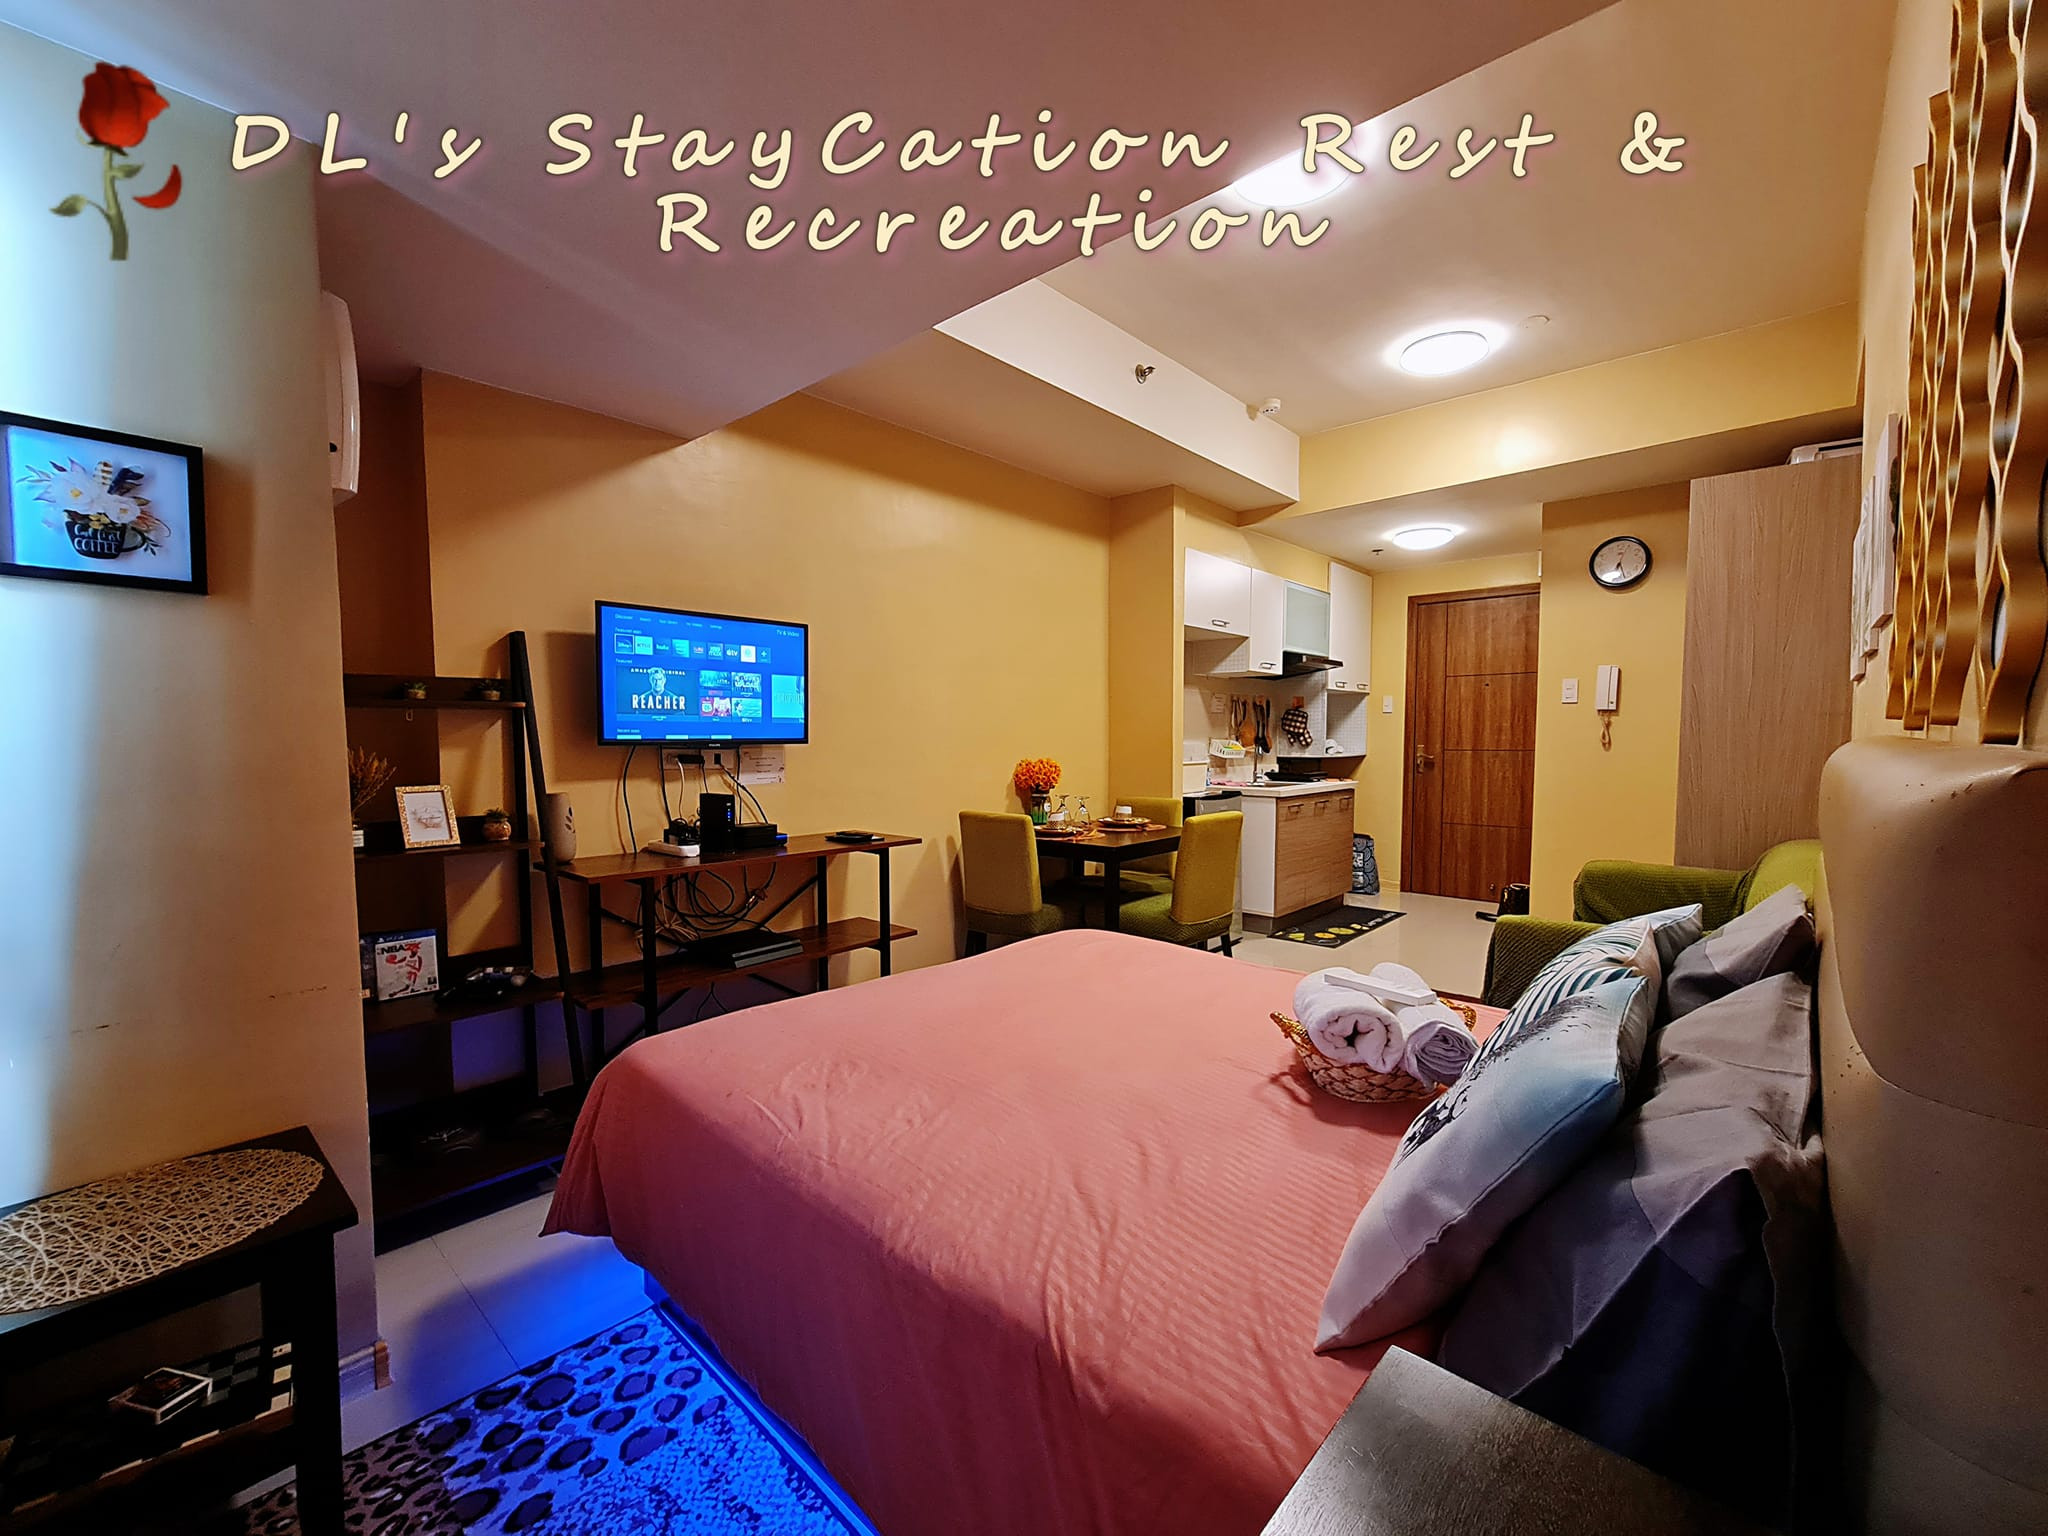 DL's StayCation Rest & Recreation